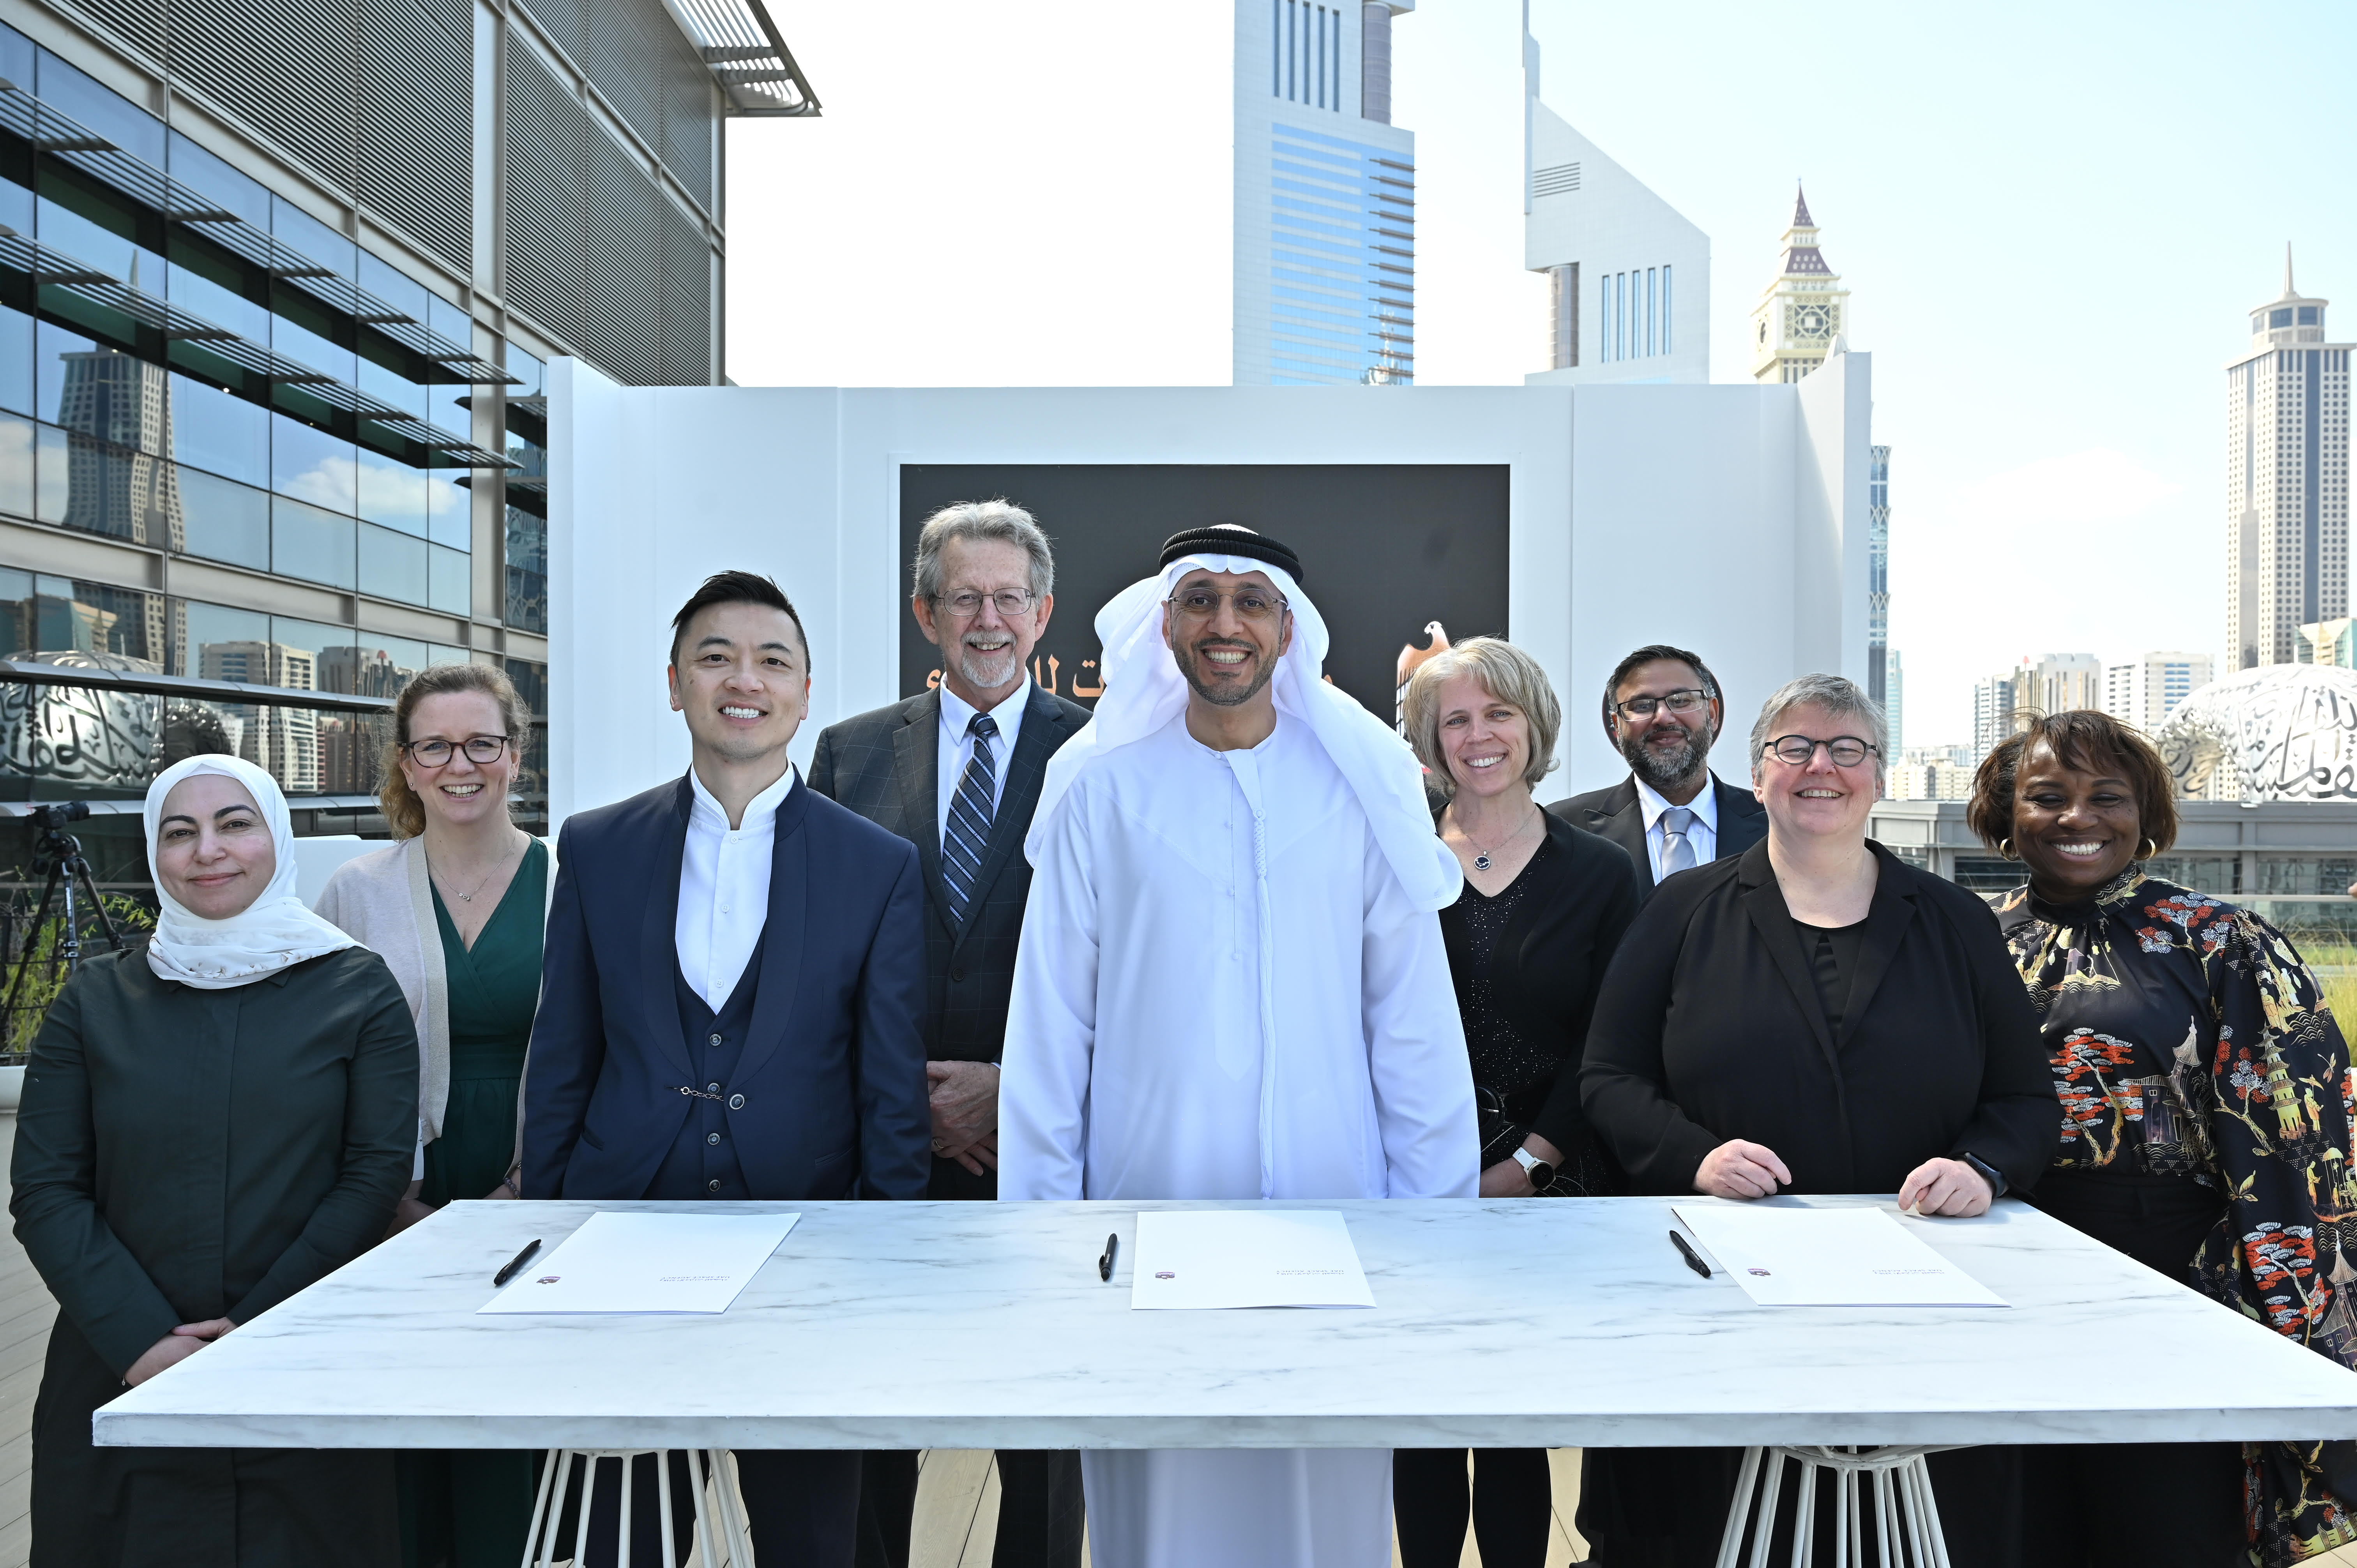 (From left: Dr. Ghada Alsaleh, Sonia Pawelczyk, Danny Yeung, Dr. James L. Green, Ahmed Alfandi, Dr. Tara Ruttley, Wasim Ahmed, Dr. Hilde Stenuit, Dr. Camille Alleyne at the MOU signing ceremony in Dubai, UAE Space Agency)